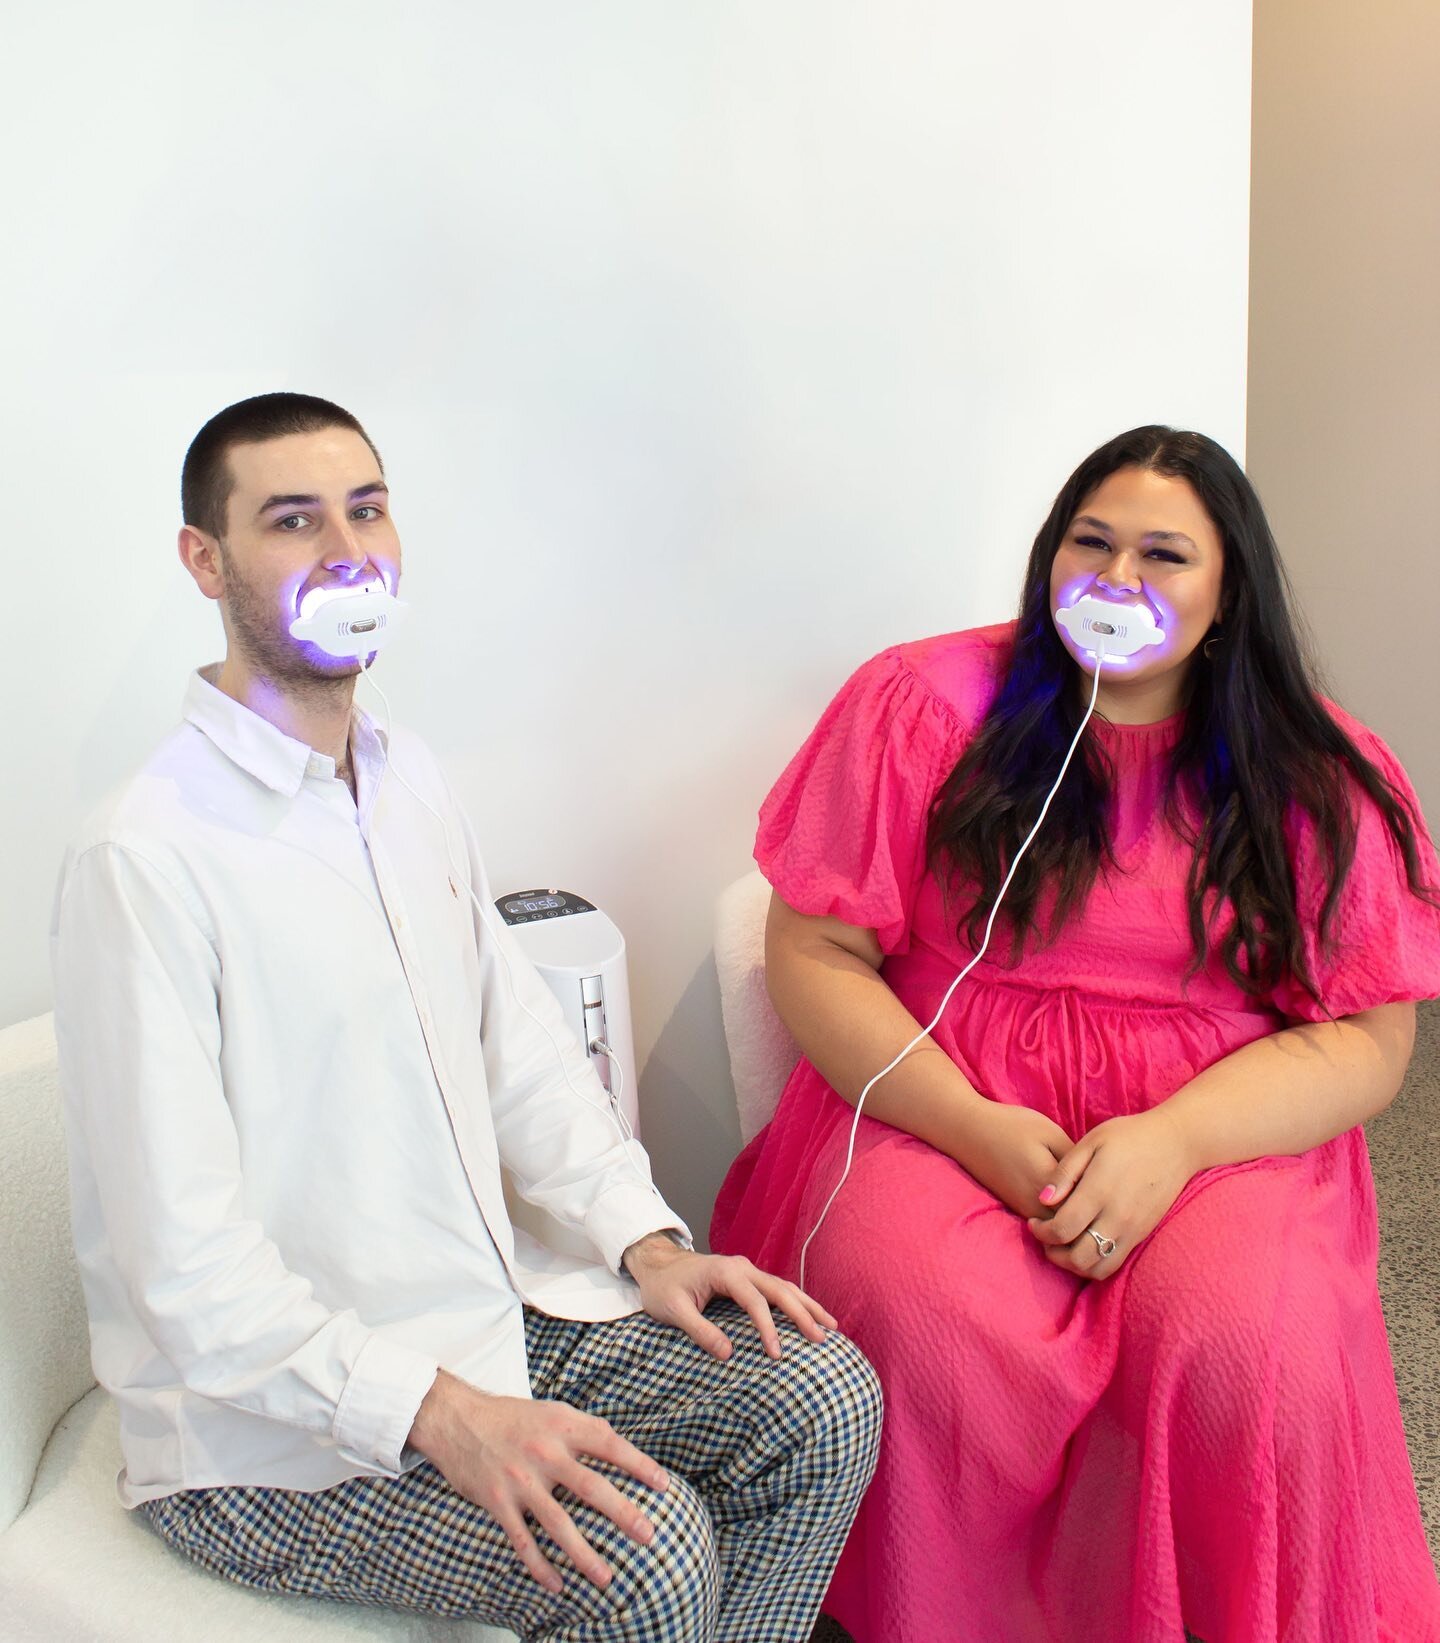 TEETH FOR TWO🦷
Why not make it a date! Come along with your bestie, hubby or sister &amp; both receive the 'triple the glow' pain free treatment side by side! 1 hour $220 PER PERSON (currently $60 off each for a limited time)
Then book a follow up 4